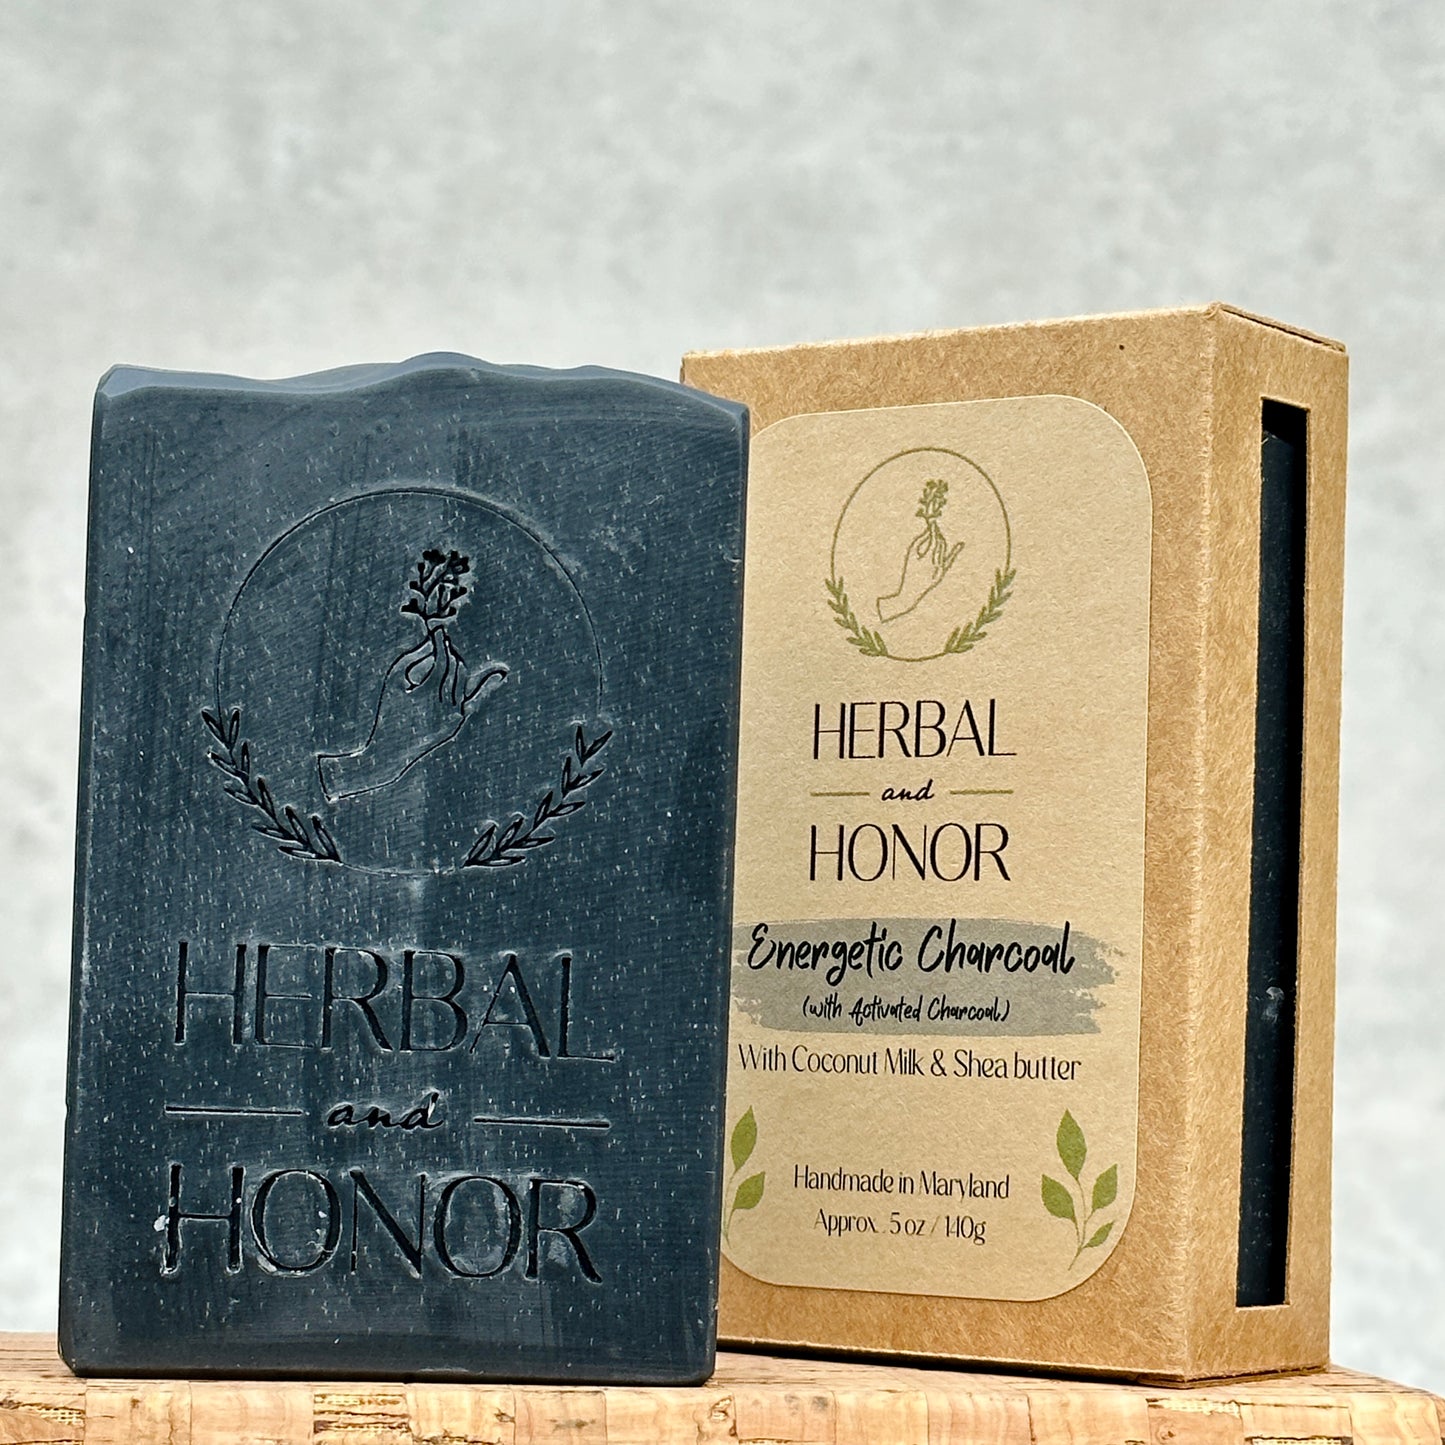 Energetic Charcoal - Coconut Milk, Shea Butter, and Activated Charcoal All Natural Bar Soap